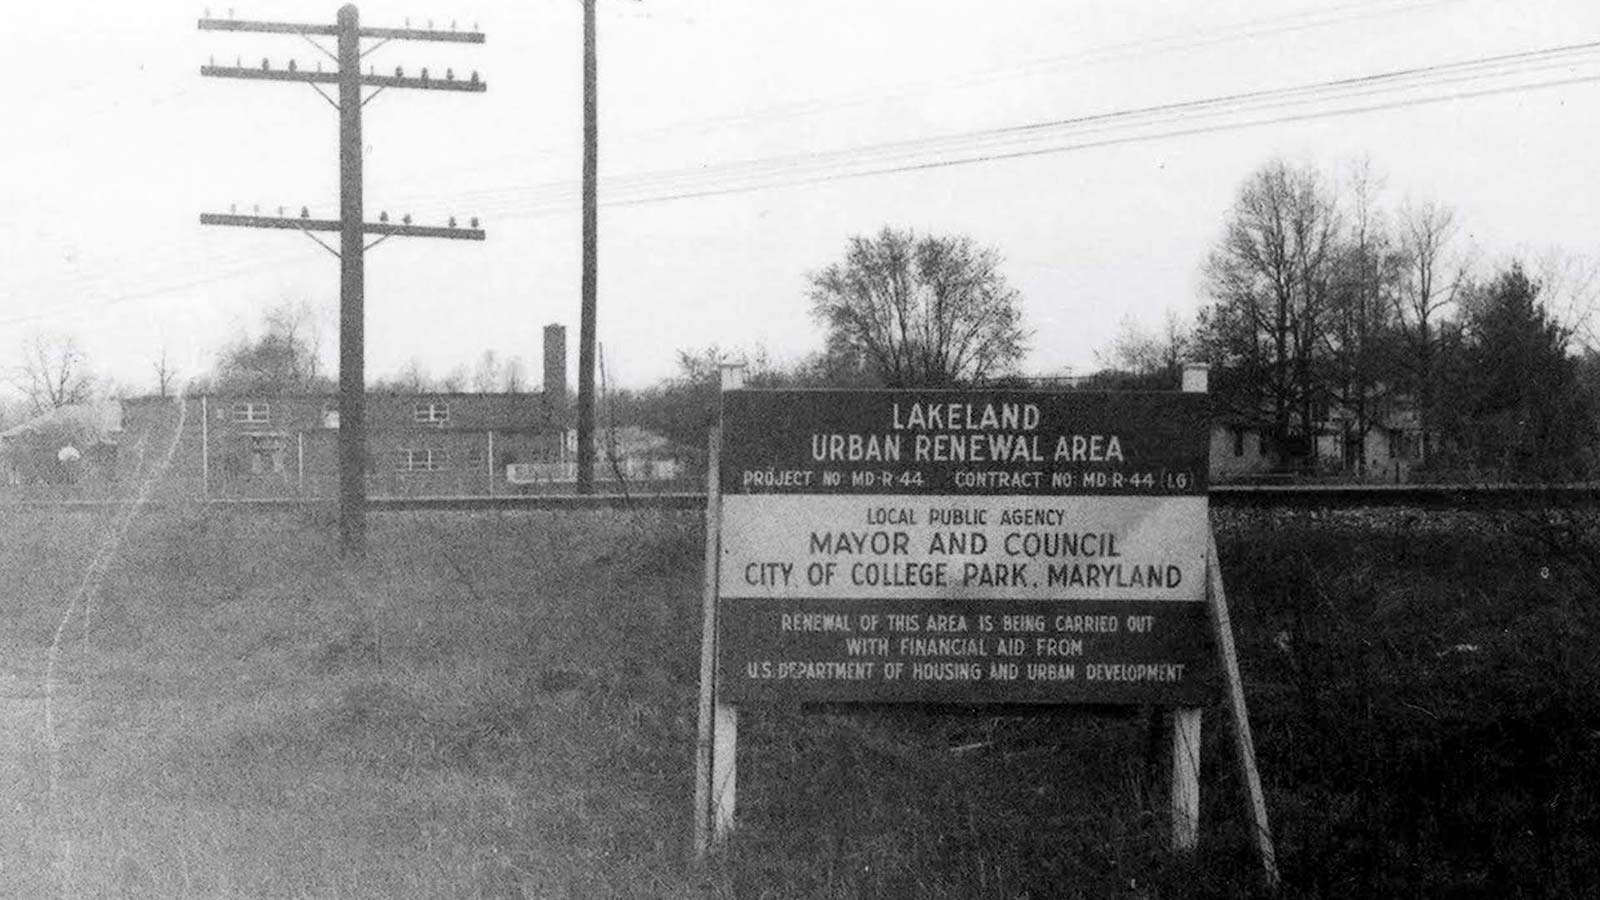 Historic photo of Lakeland by Delphine Gross.